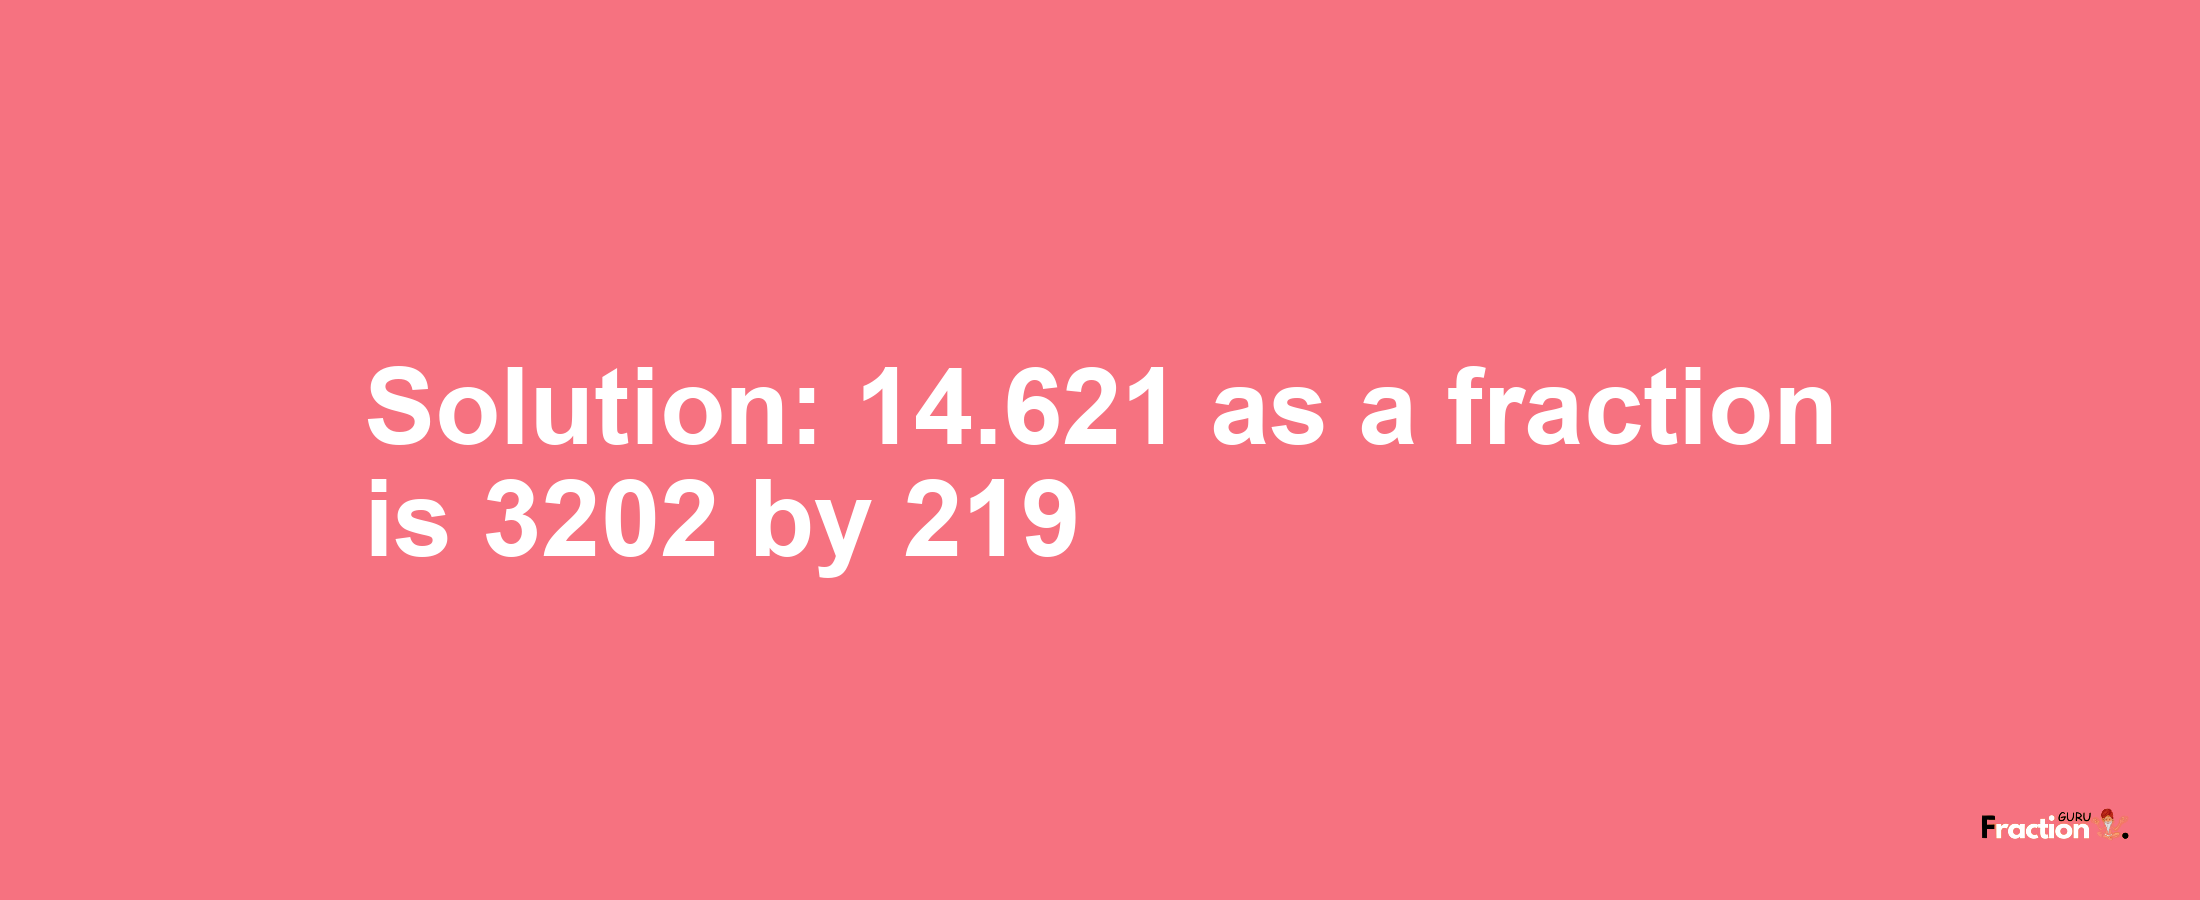 Solution:14.621 as a fraction is 3202/219